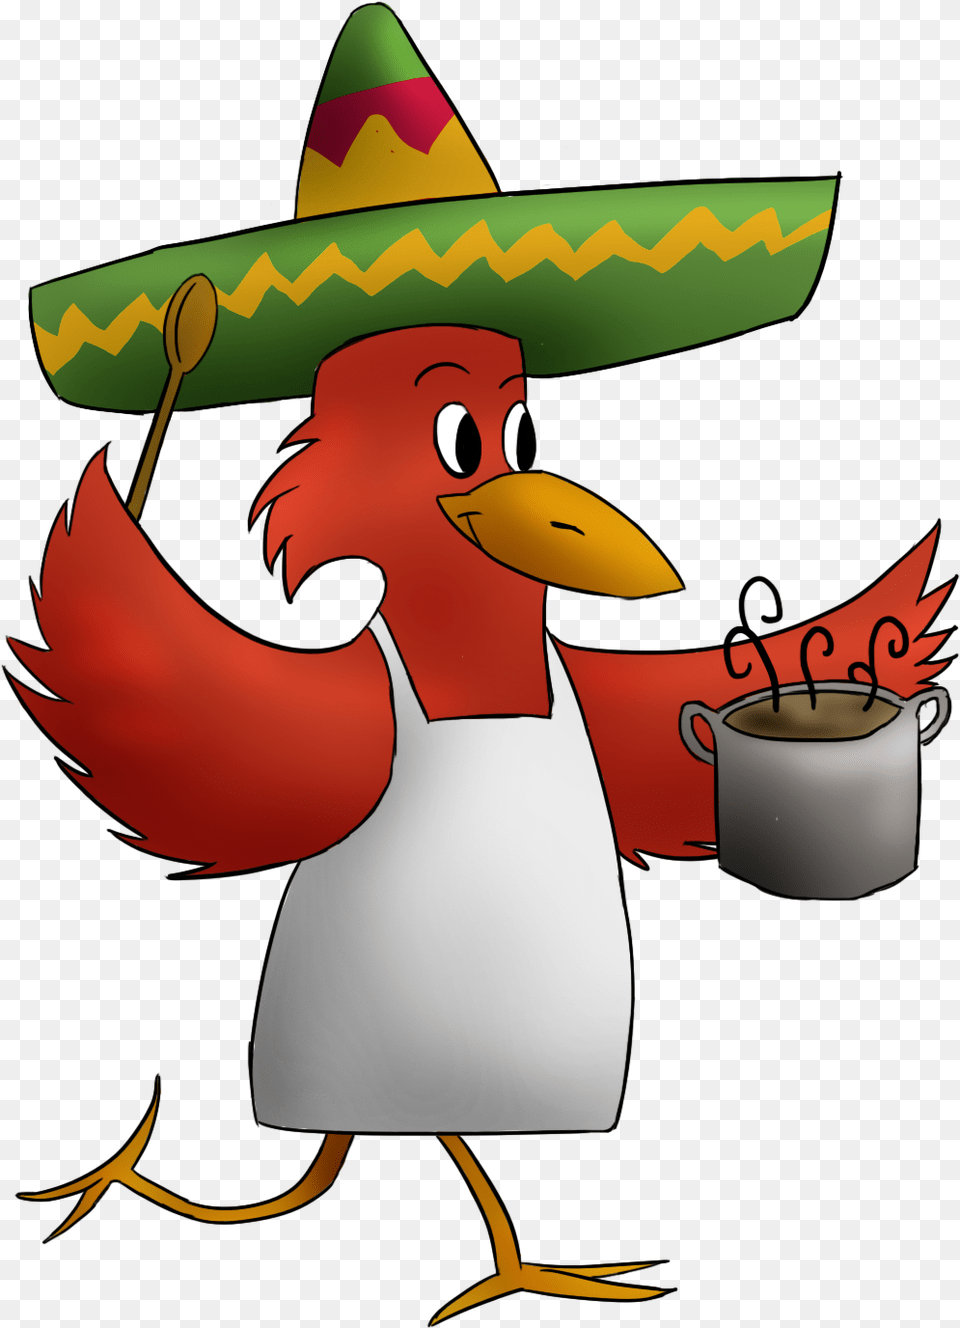 Chicken Enchiladas With Red Sauce Cartoon, Clothing, Hat, Sombrero, Cup Free Png Download